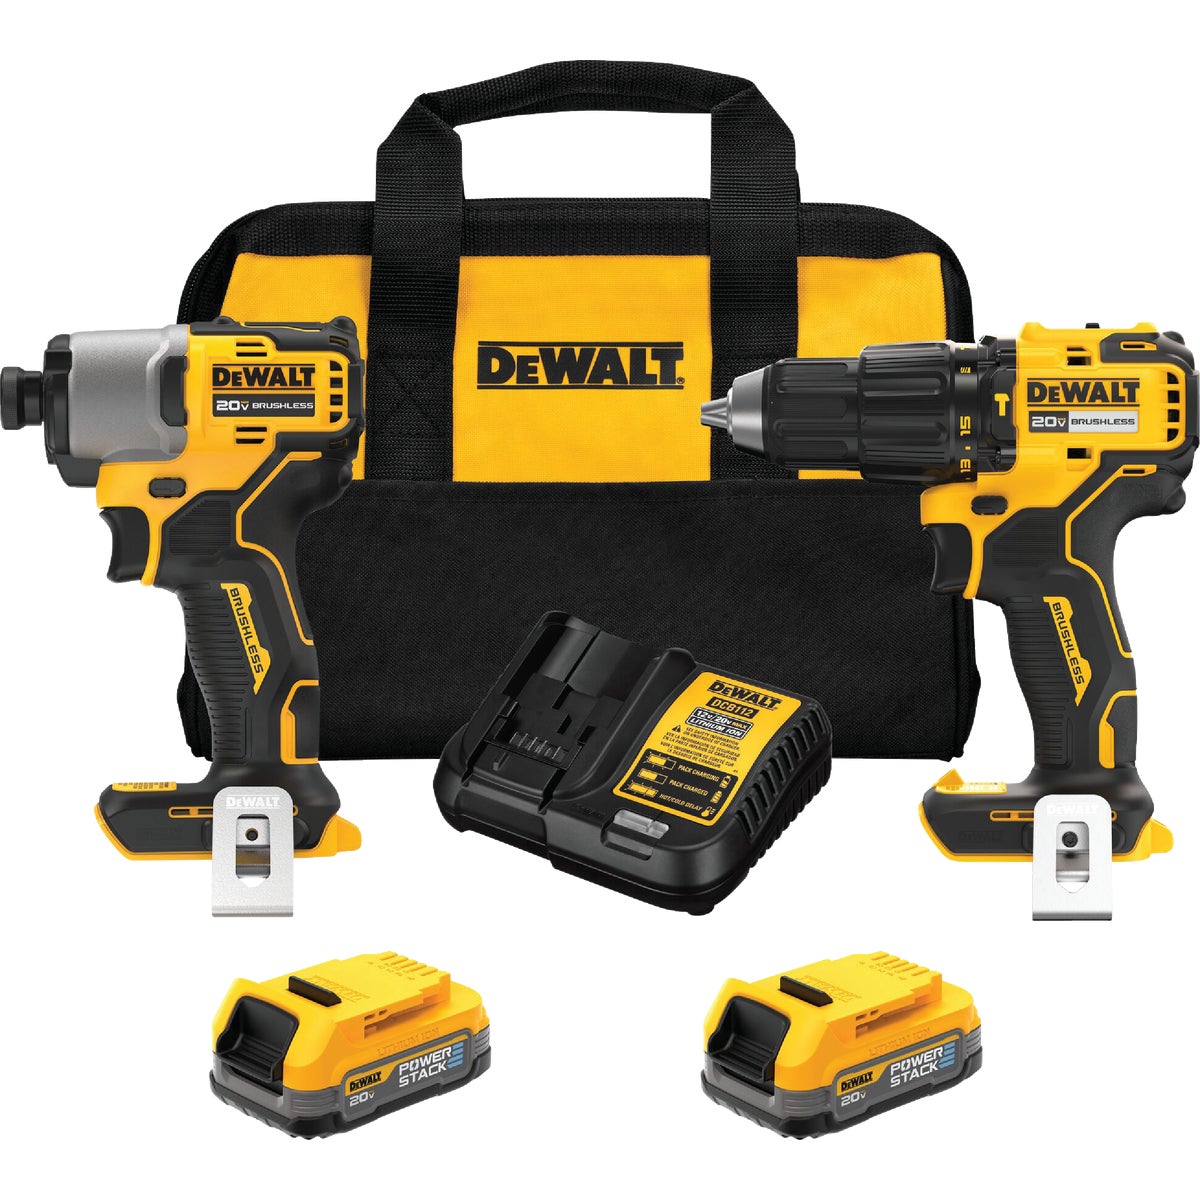 DEWALT 2-Tool 20V MAX Brushless Hammer Drill/Driver & Impact Driver Cordless Tool Combo Kit with 2 POWERSTACK Batteries